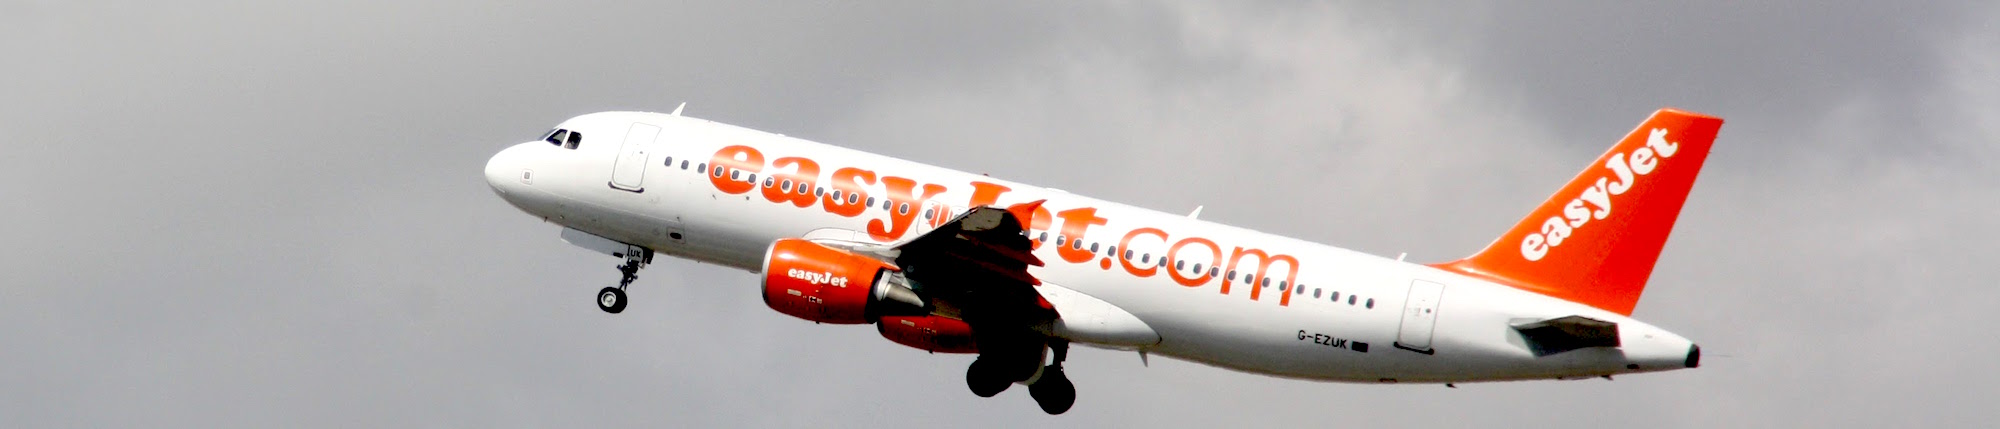 Best time to book flights for Barcelona (BCN) to Liverpool (LPL) flights with EasyJet at AirHint